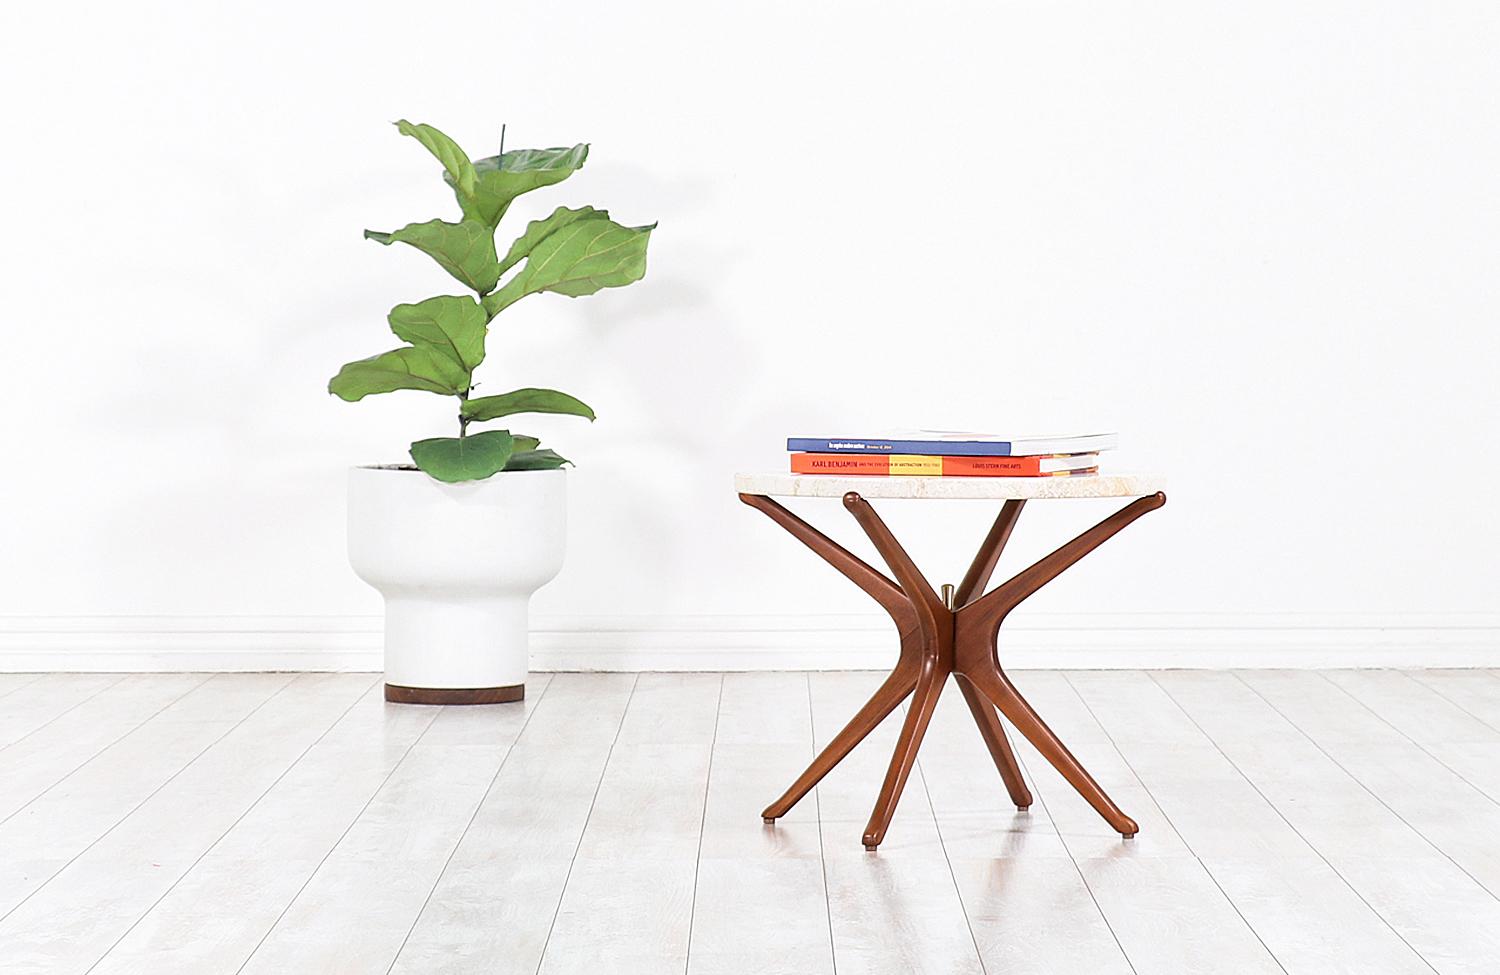 Stylish Mid-Century Modern sculpted Jax side table designed and manufactured in Italy circa 1950s. This sleek design features an atomic Jax-shaped walnut wood base with a brass pin in the center of the structure, adding an elegant touch to the